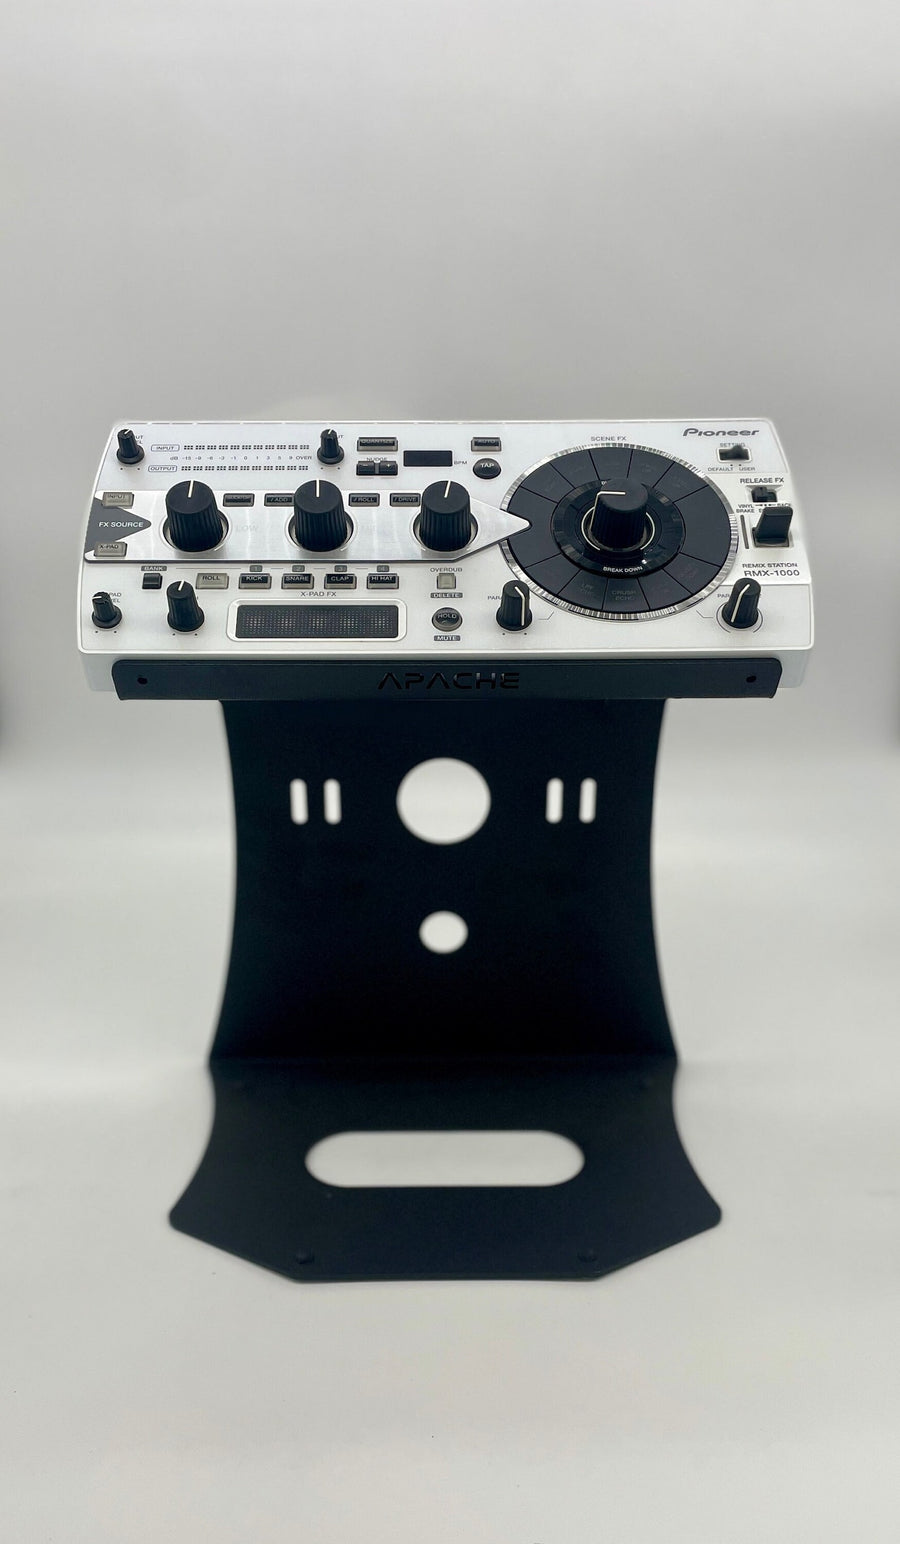 AFX Stand (For Pioneer RMX & FX Units)